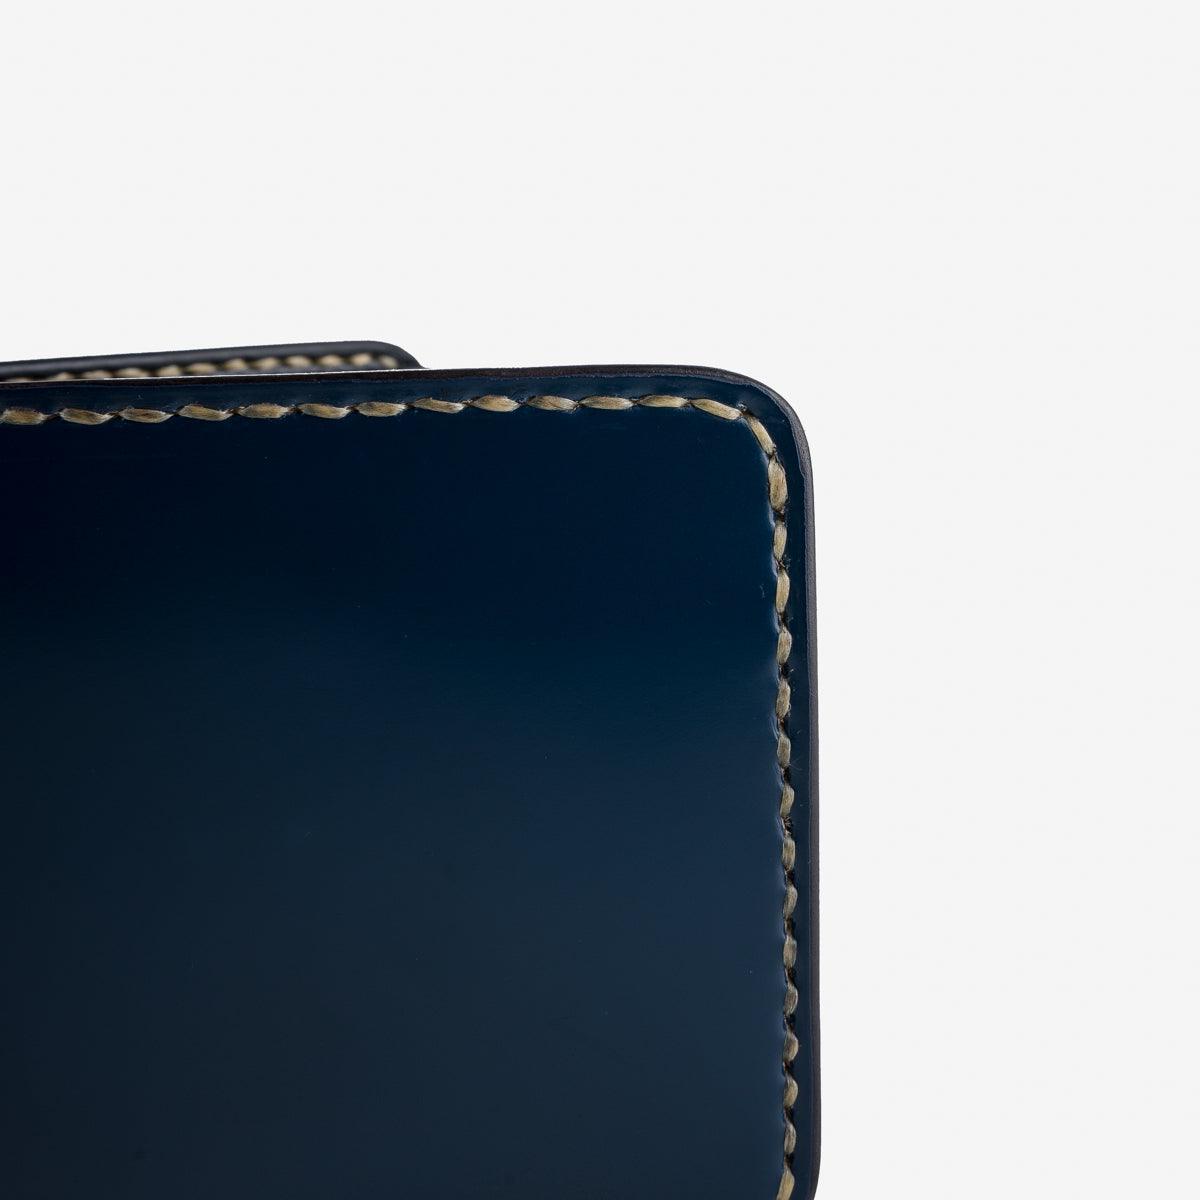 Image showing the IHG-071-NAV -Slimline Small Shell Cordovan Wallet - Navy which is a WALLETS AND CHAINS described by the following info Accessories, Iron Heart, Released, WALLETS AND CHAINS and sold on the IRON HEART GERMANY online store